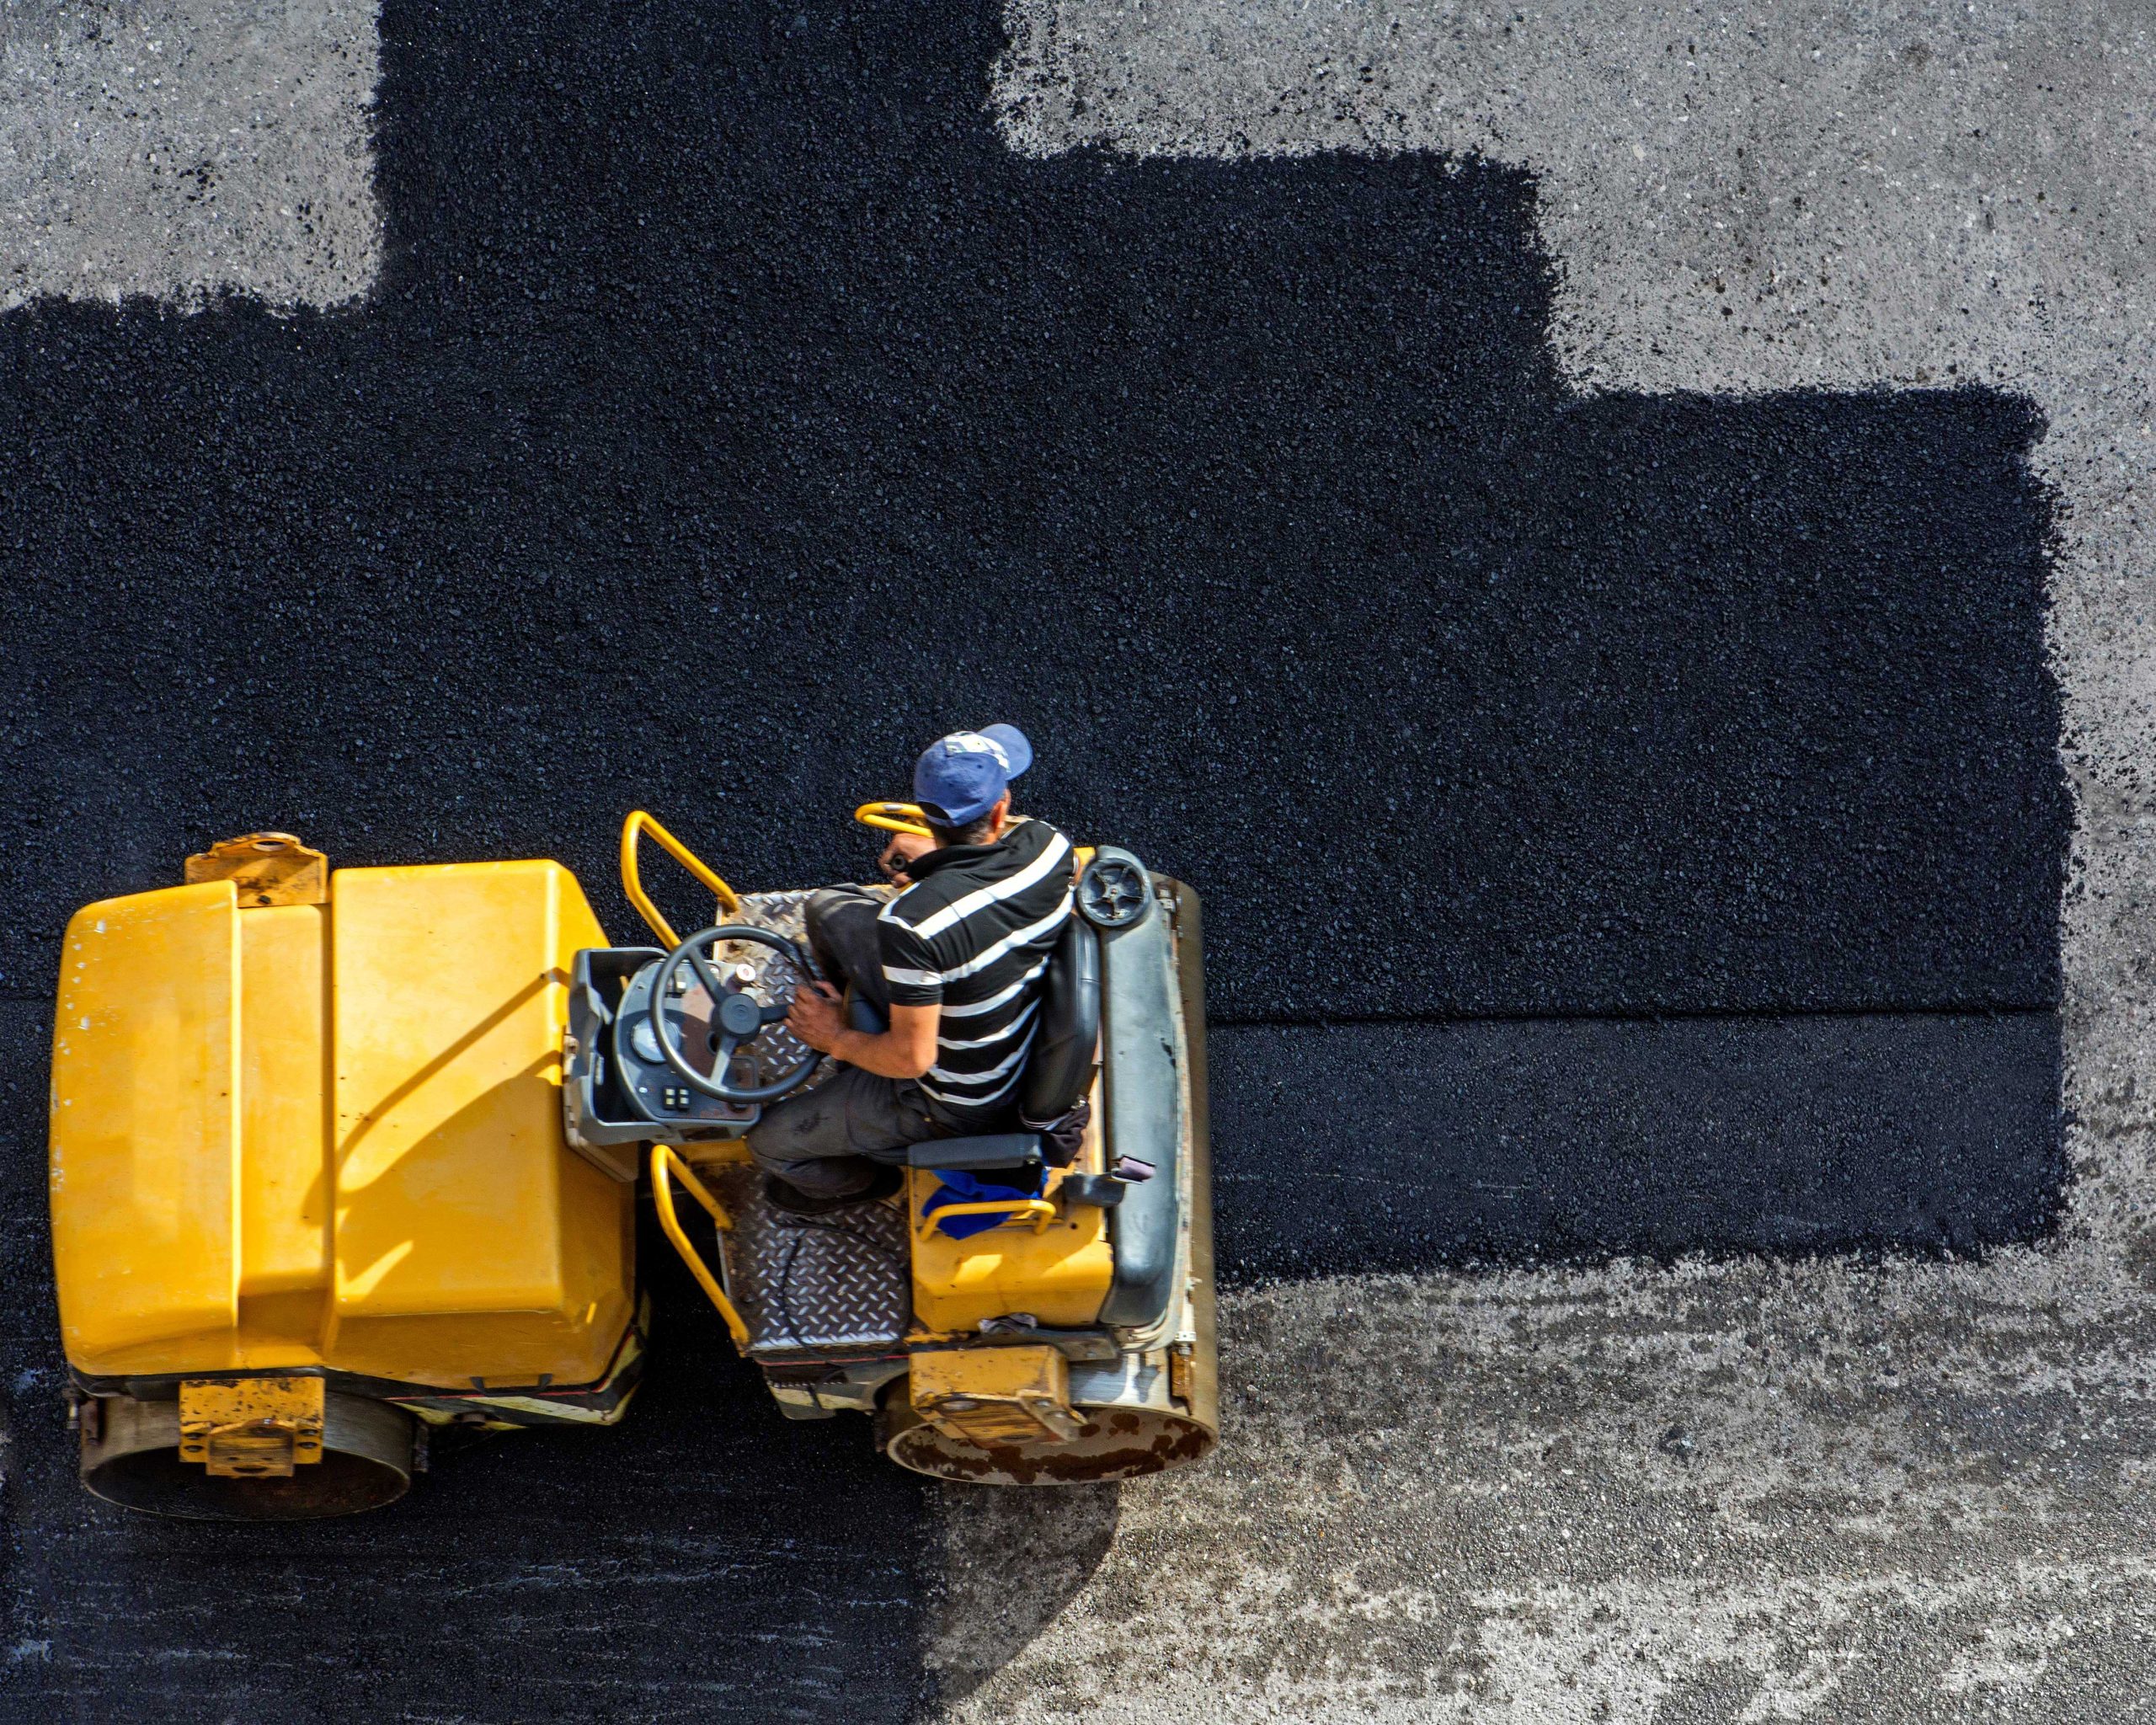 A commercial asphalt contractor operates a roller to repave an asphalt parking lot.